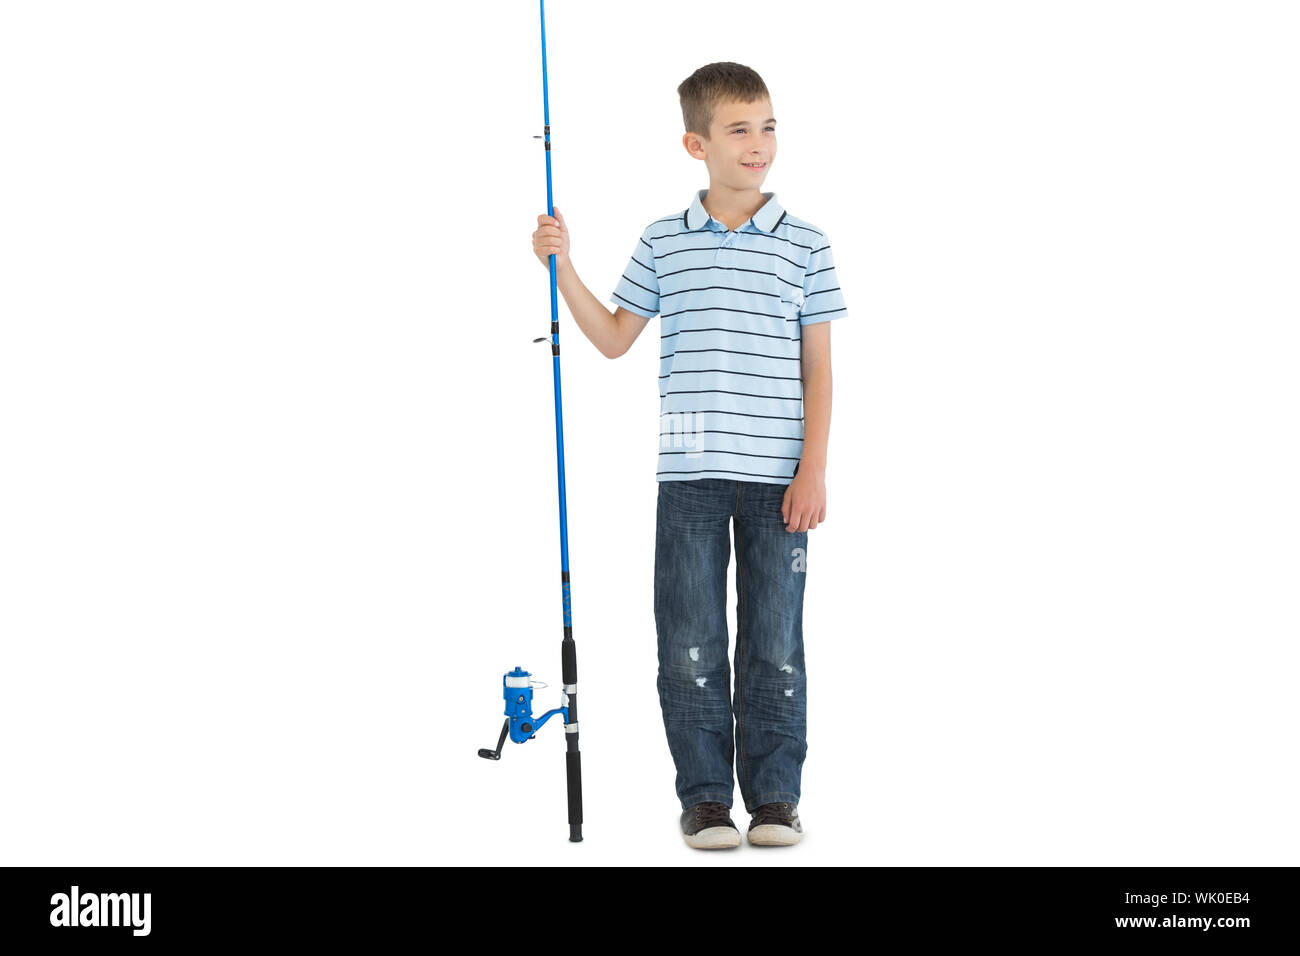 Child fishing rod Cut Out Stock Images & Pictures - Alamy